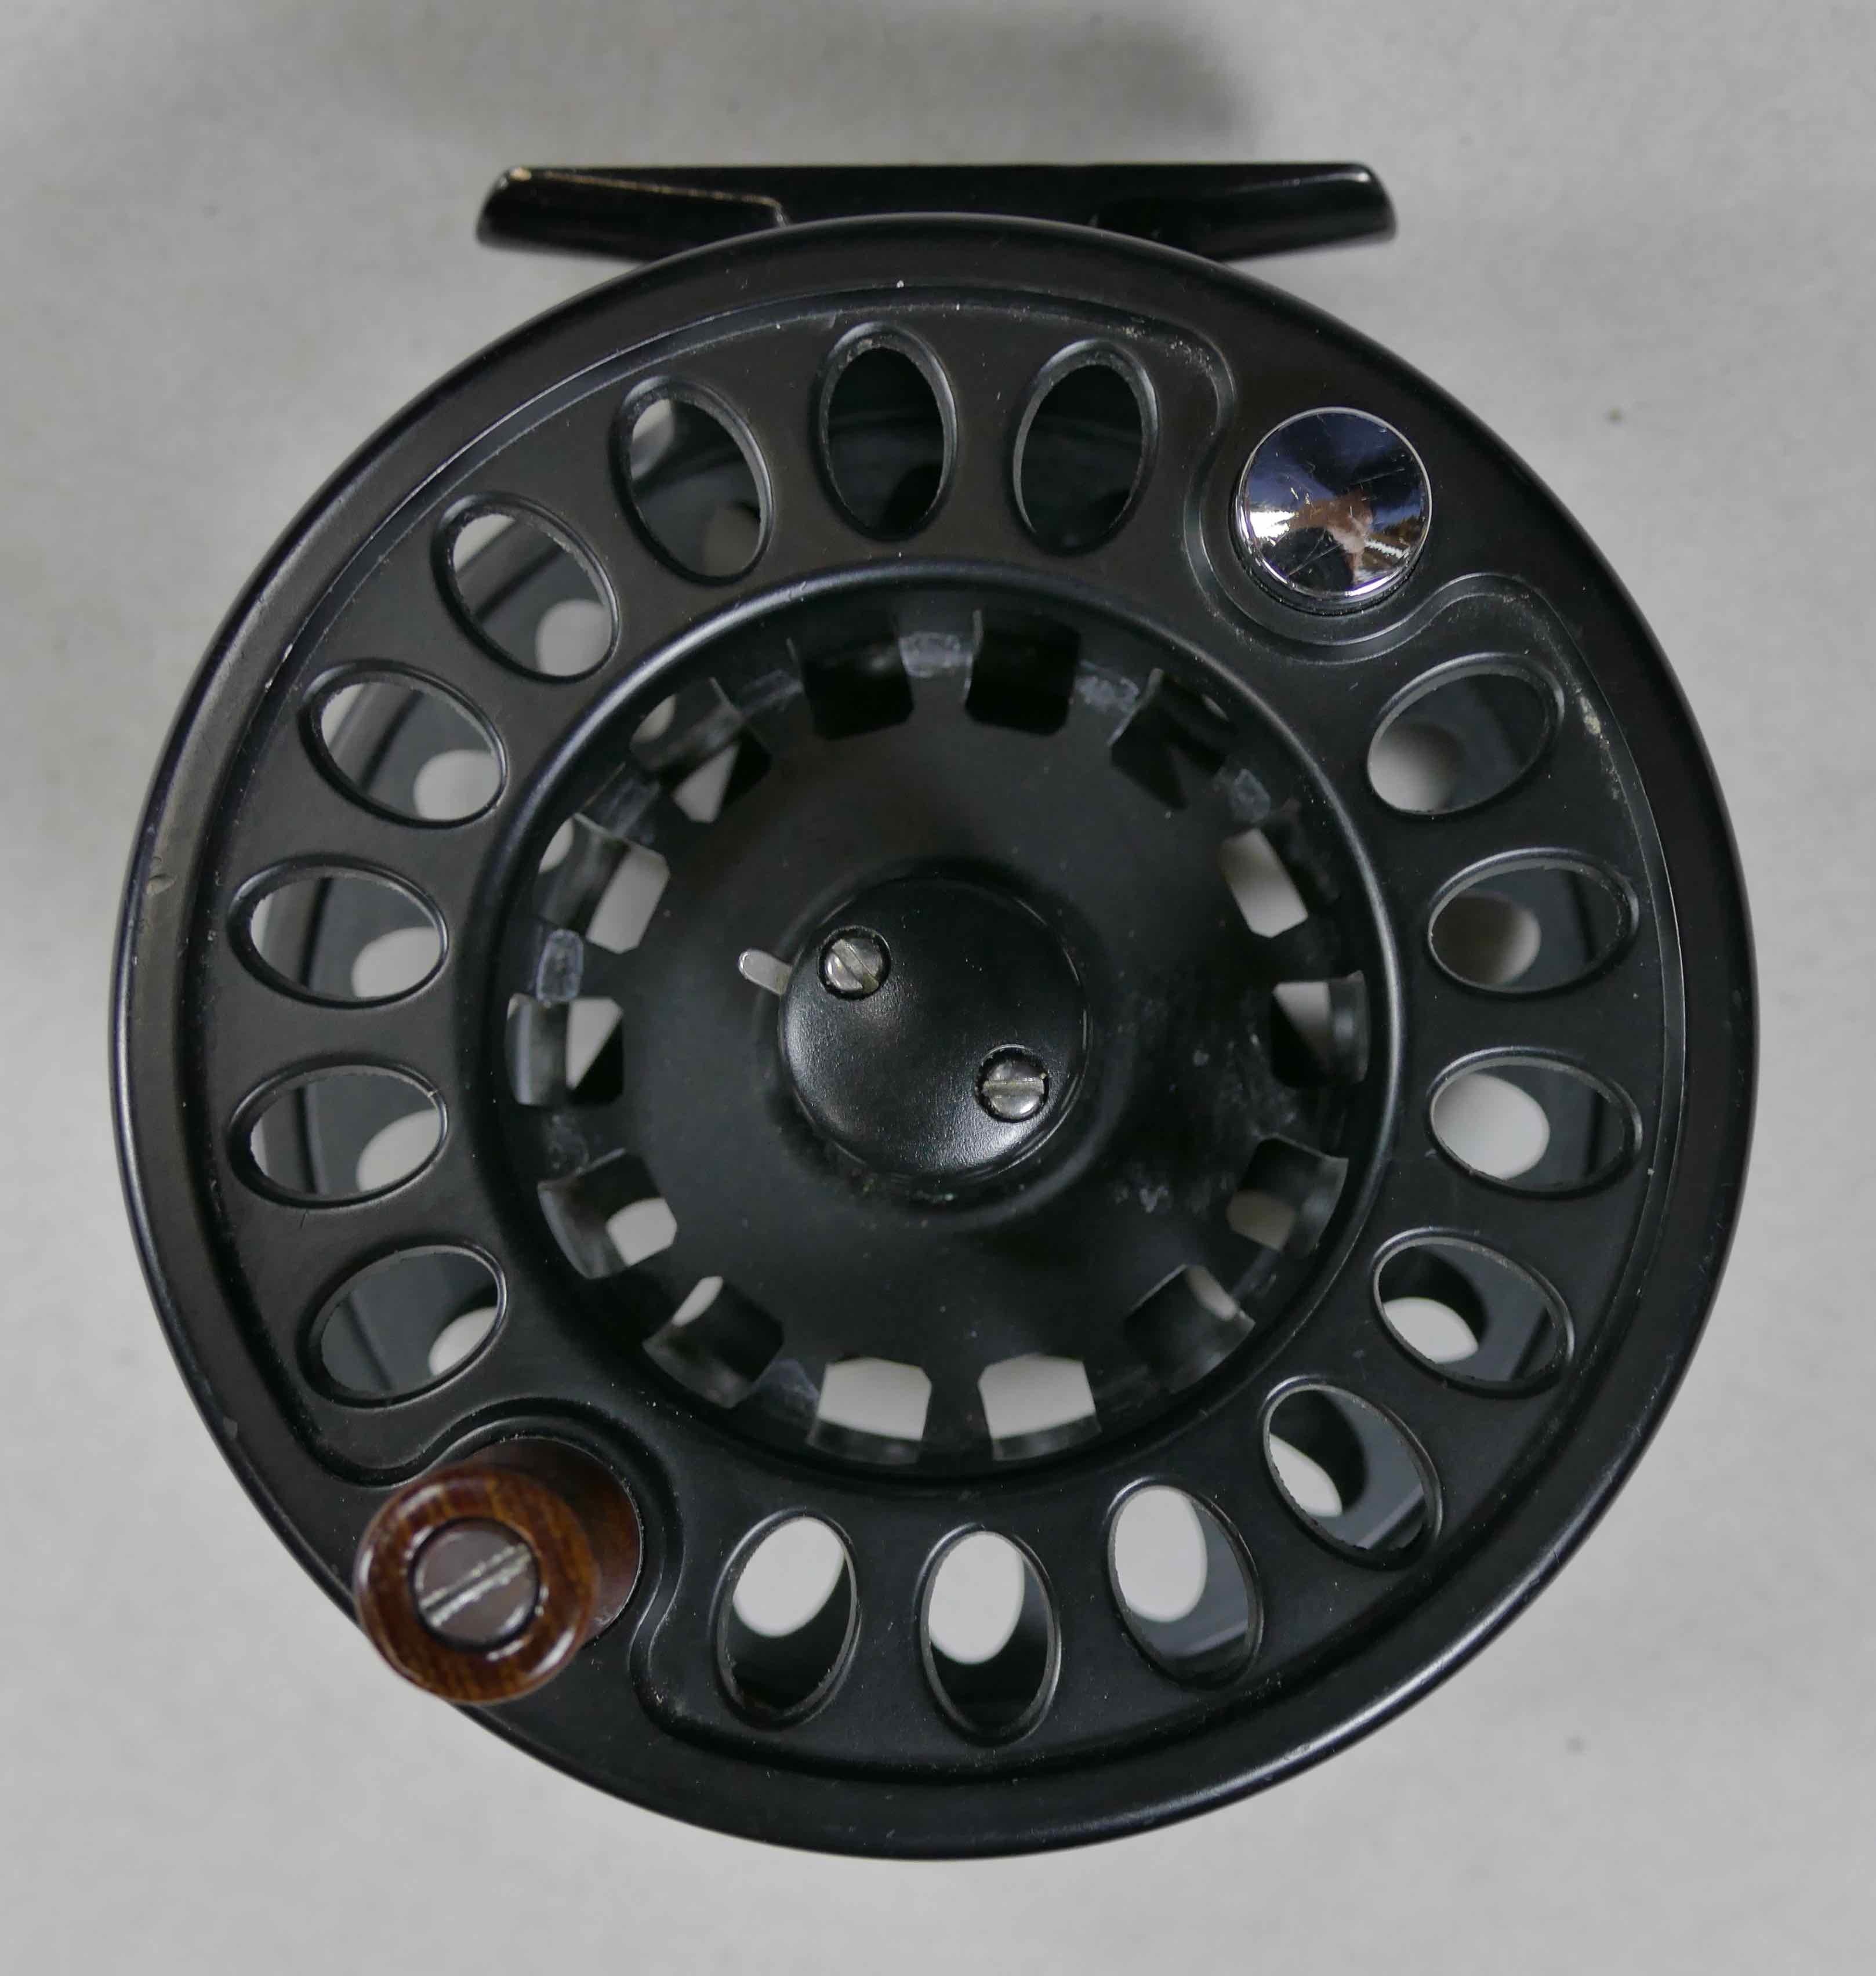 Guideline Reelmaster Salmon mid arbour fly reel in excellent shape. $80.00